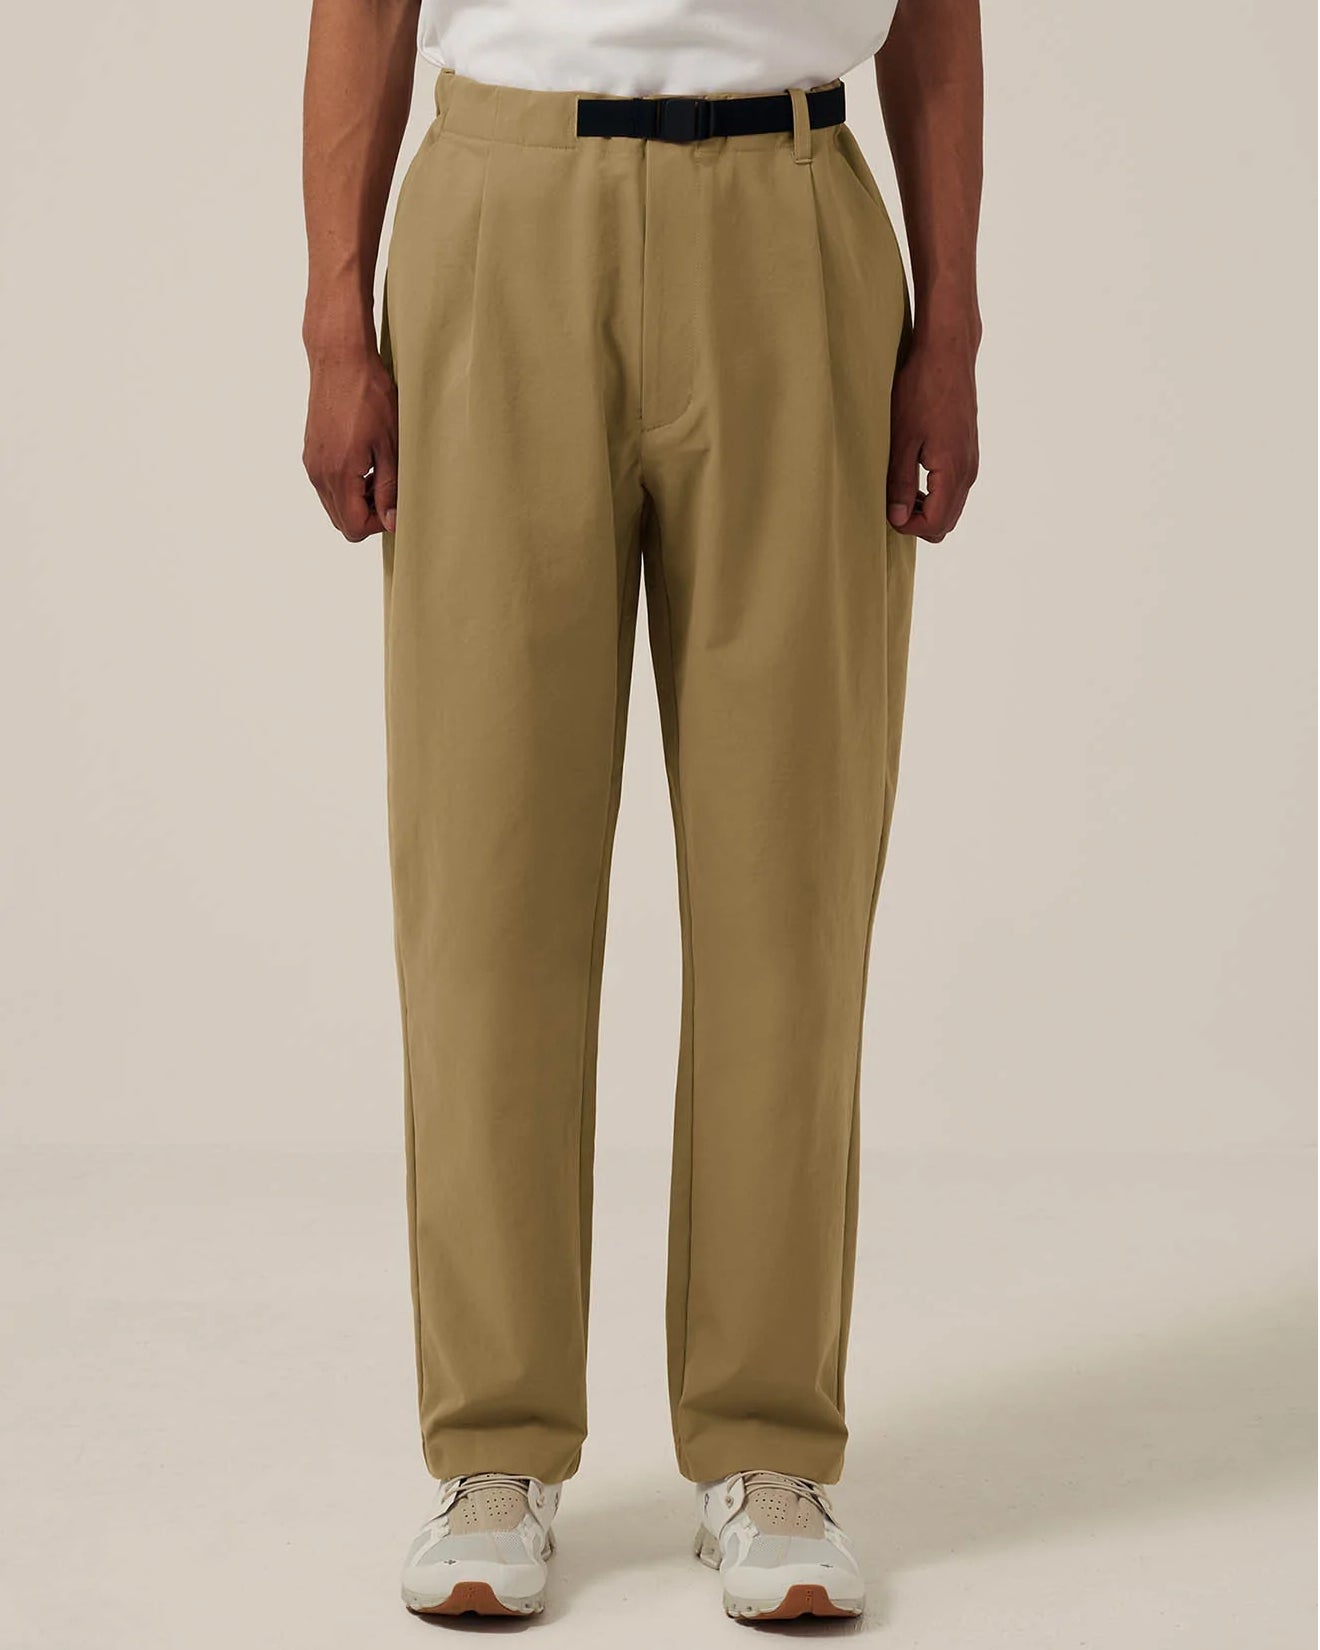 One Tuck Tapered Stretch Pants - Clay Beige